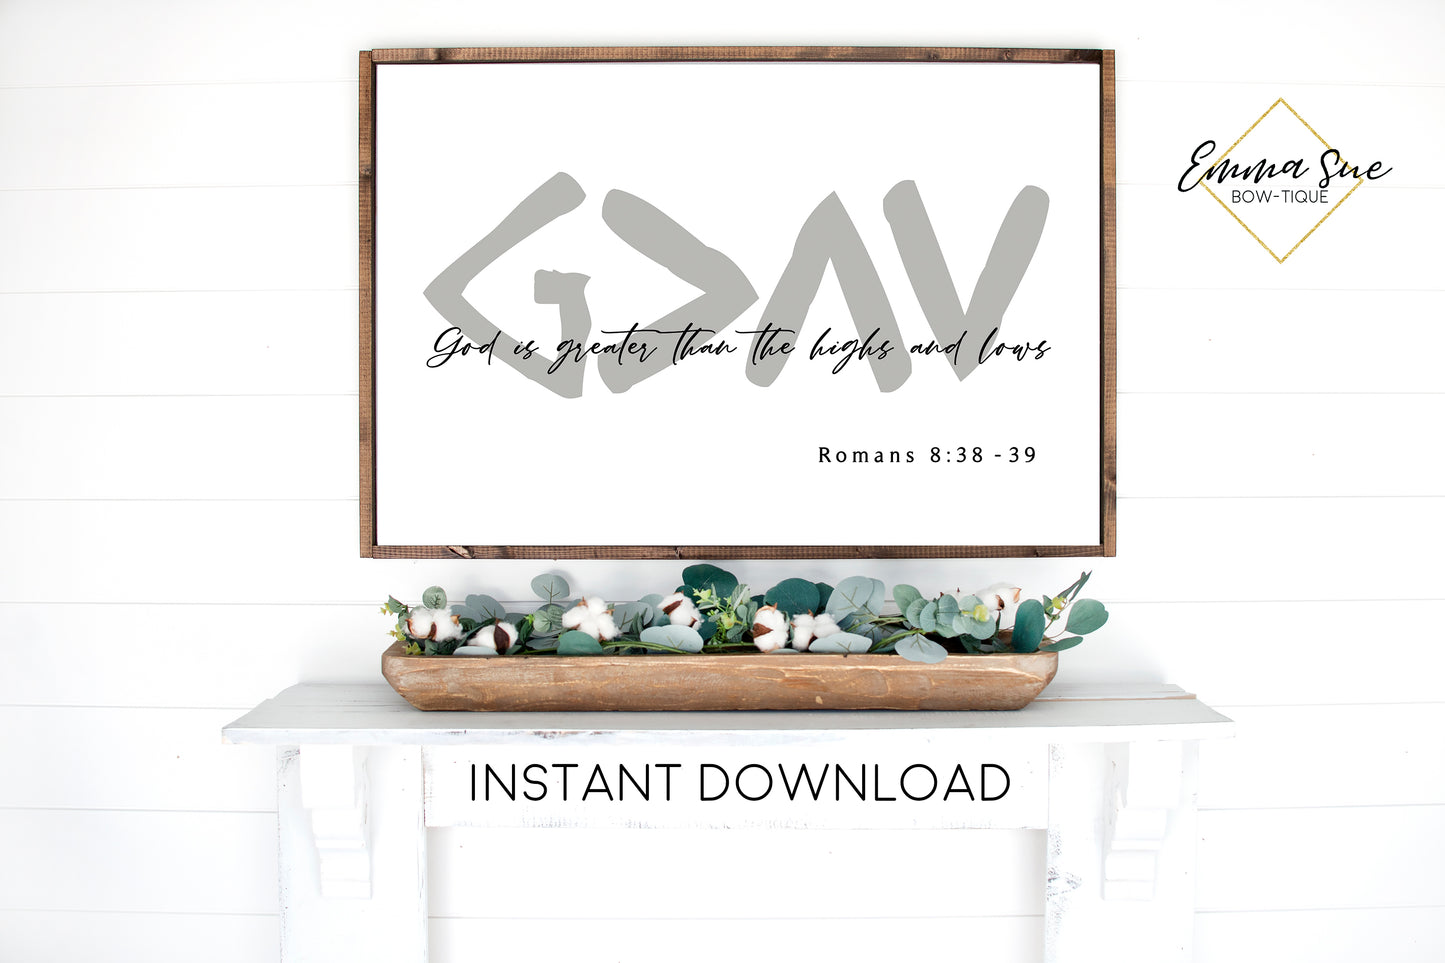 God is greater than the highs and lows - Greek Letters Romans 8:38-39 Bible Verse Printable Sign Wall Art - Instant Download